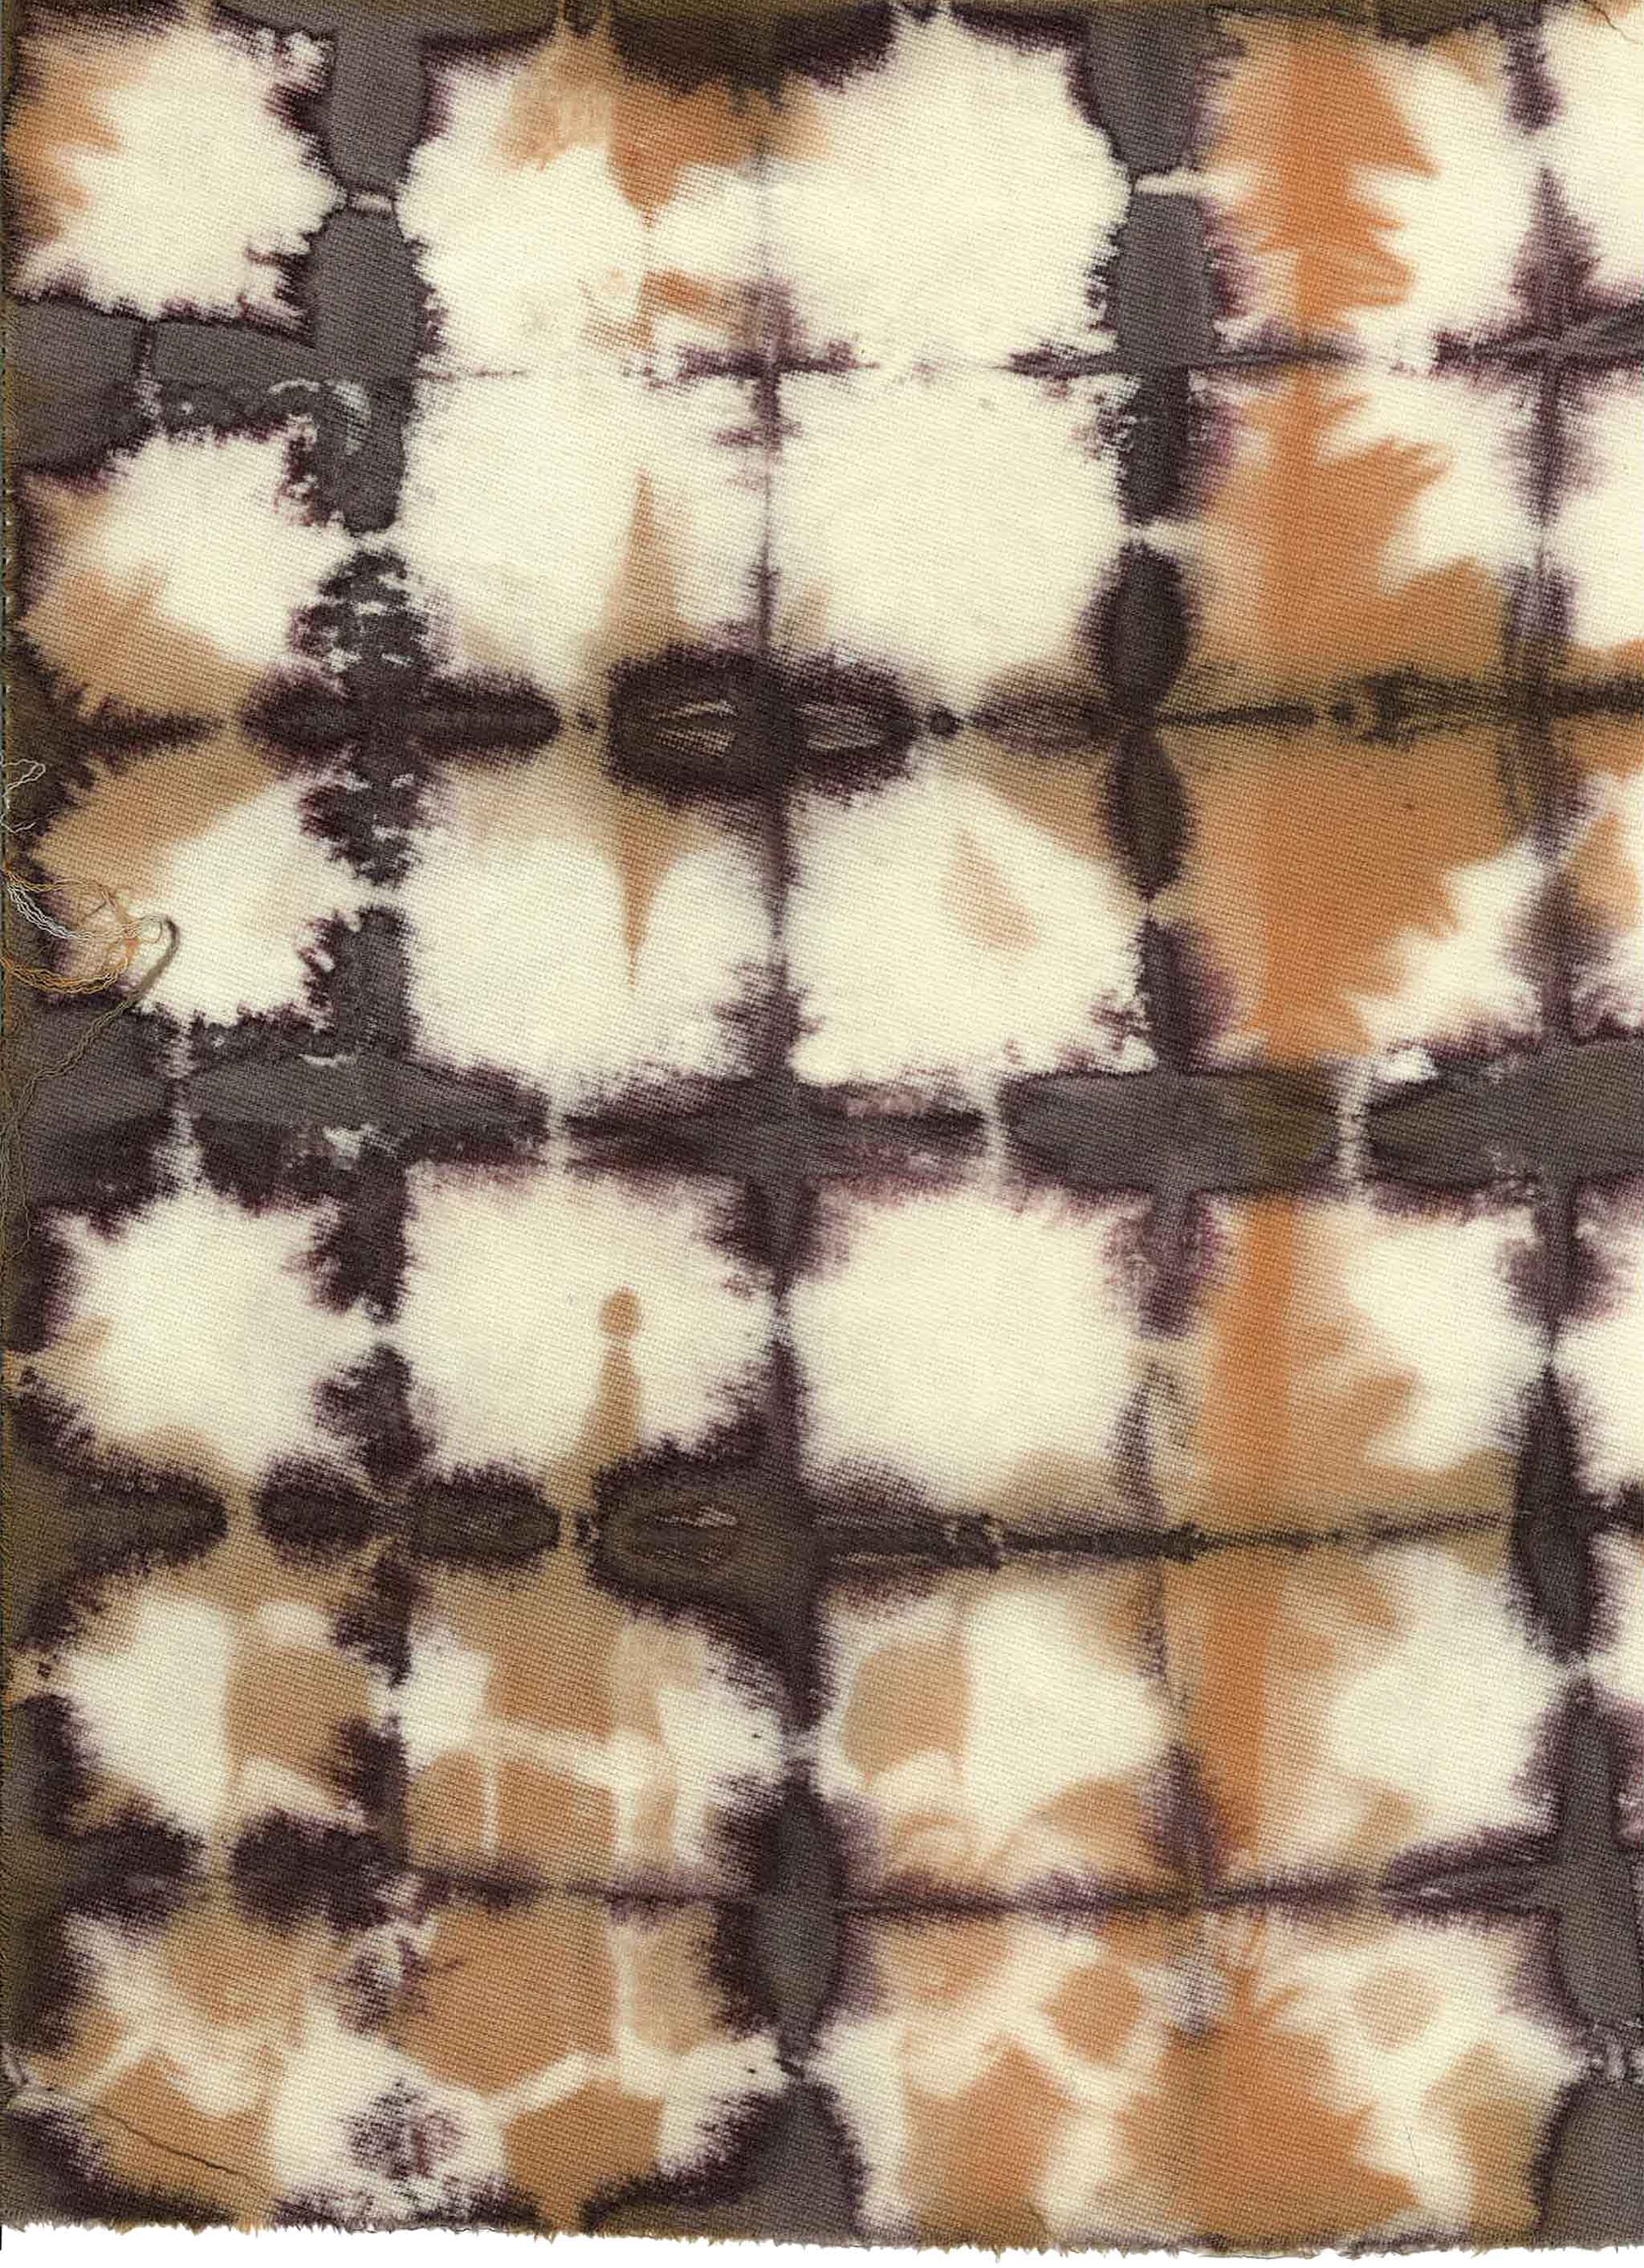 Scan of a piece of dyed/stained cotton made by Michael Christie (The Ruggist) during the Natural Dyes Art Day at Creative Matters. This piece went on to inspire the carpet 'Ichiban' which debuts at The Rug Show at Javits, 10-13 September, 2017. | Scan courtesy of Creative Matters.